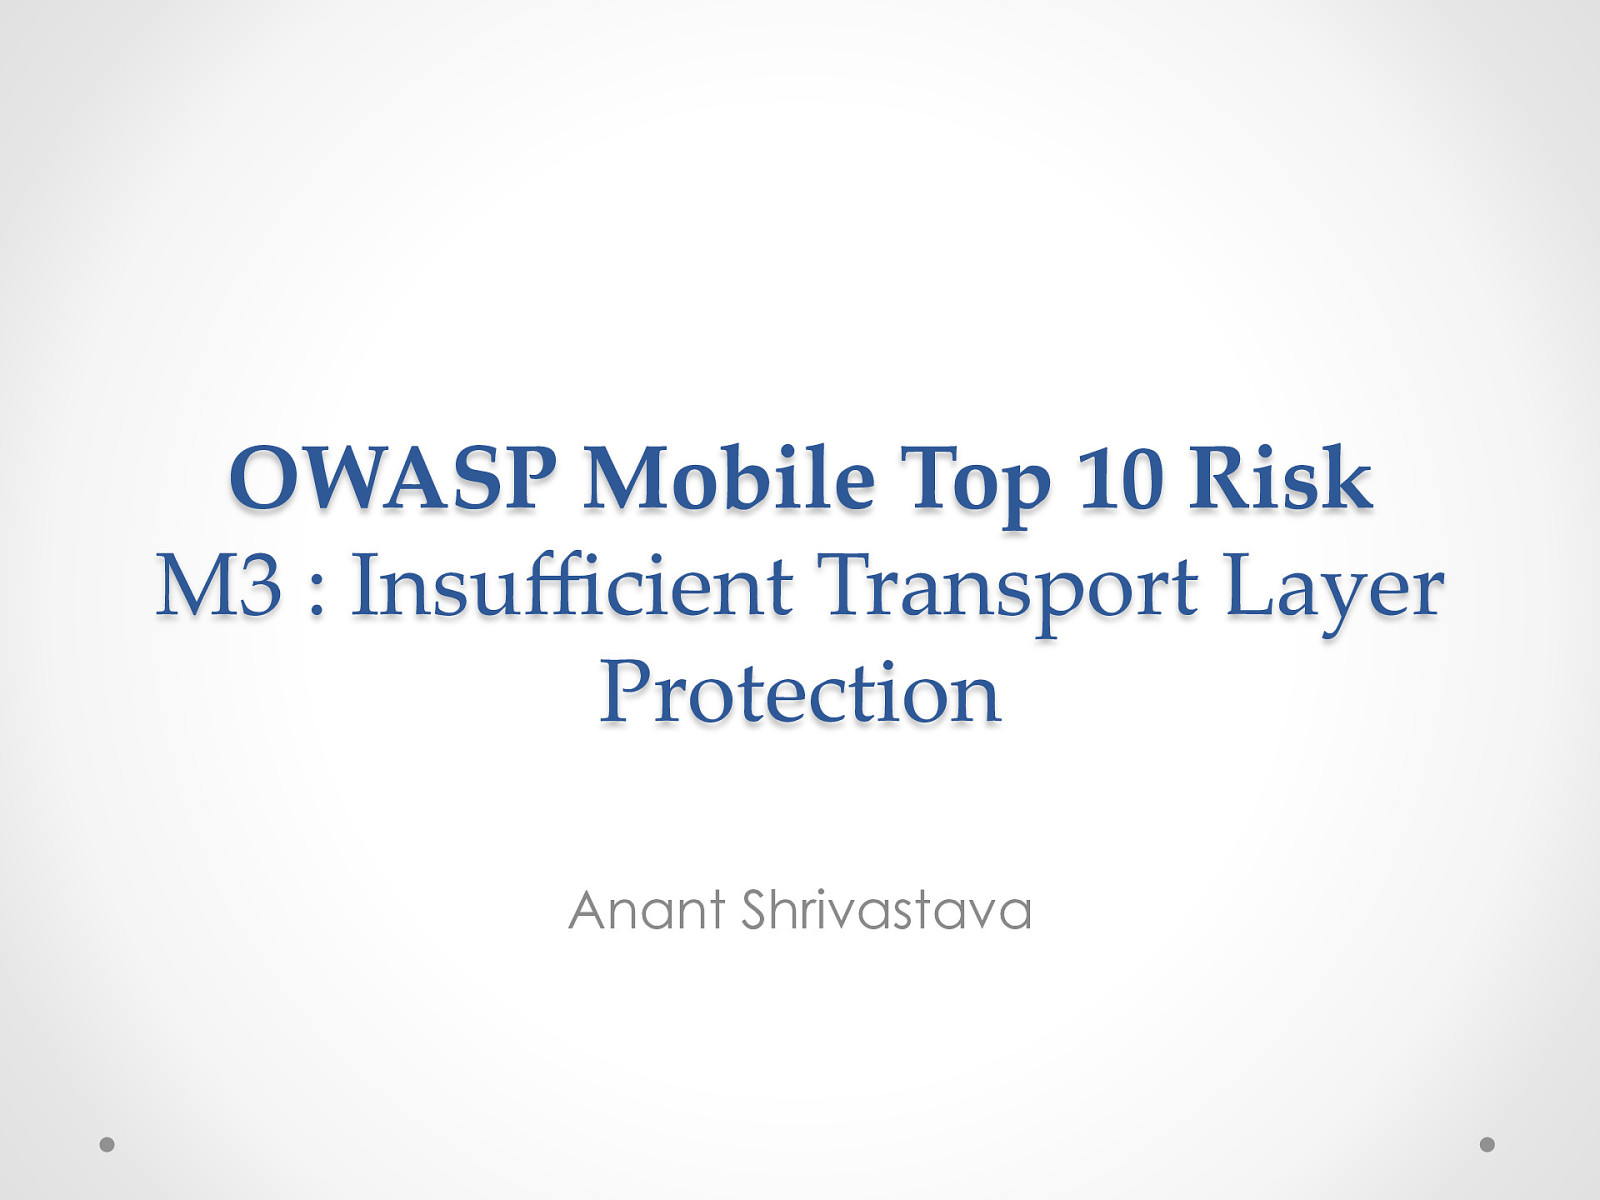 Owasp Mobile Risk Series : M3 : Insufficient Transport Layer Protection